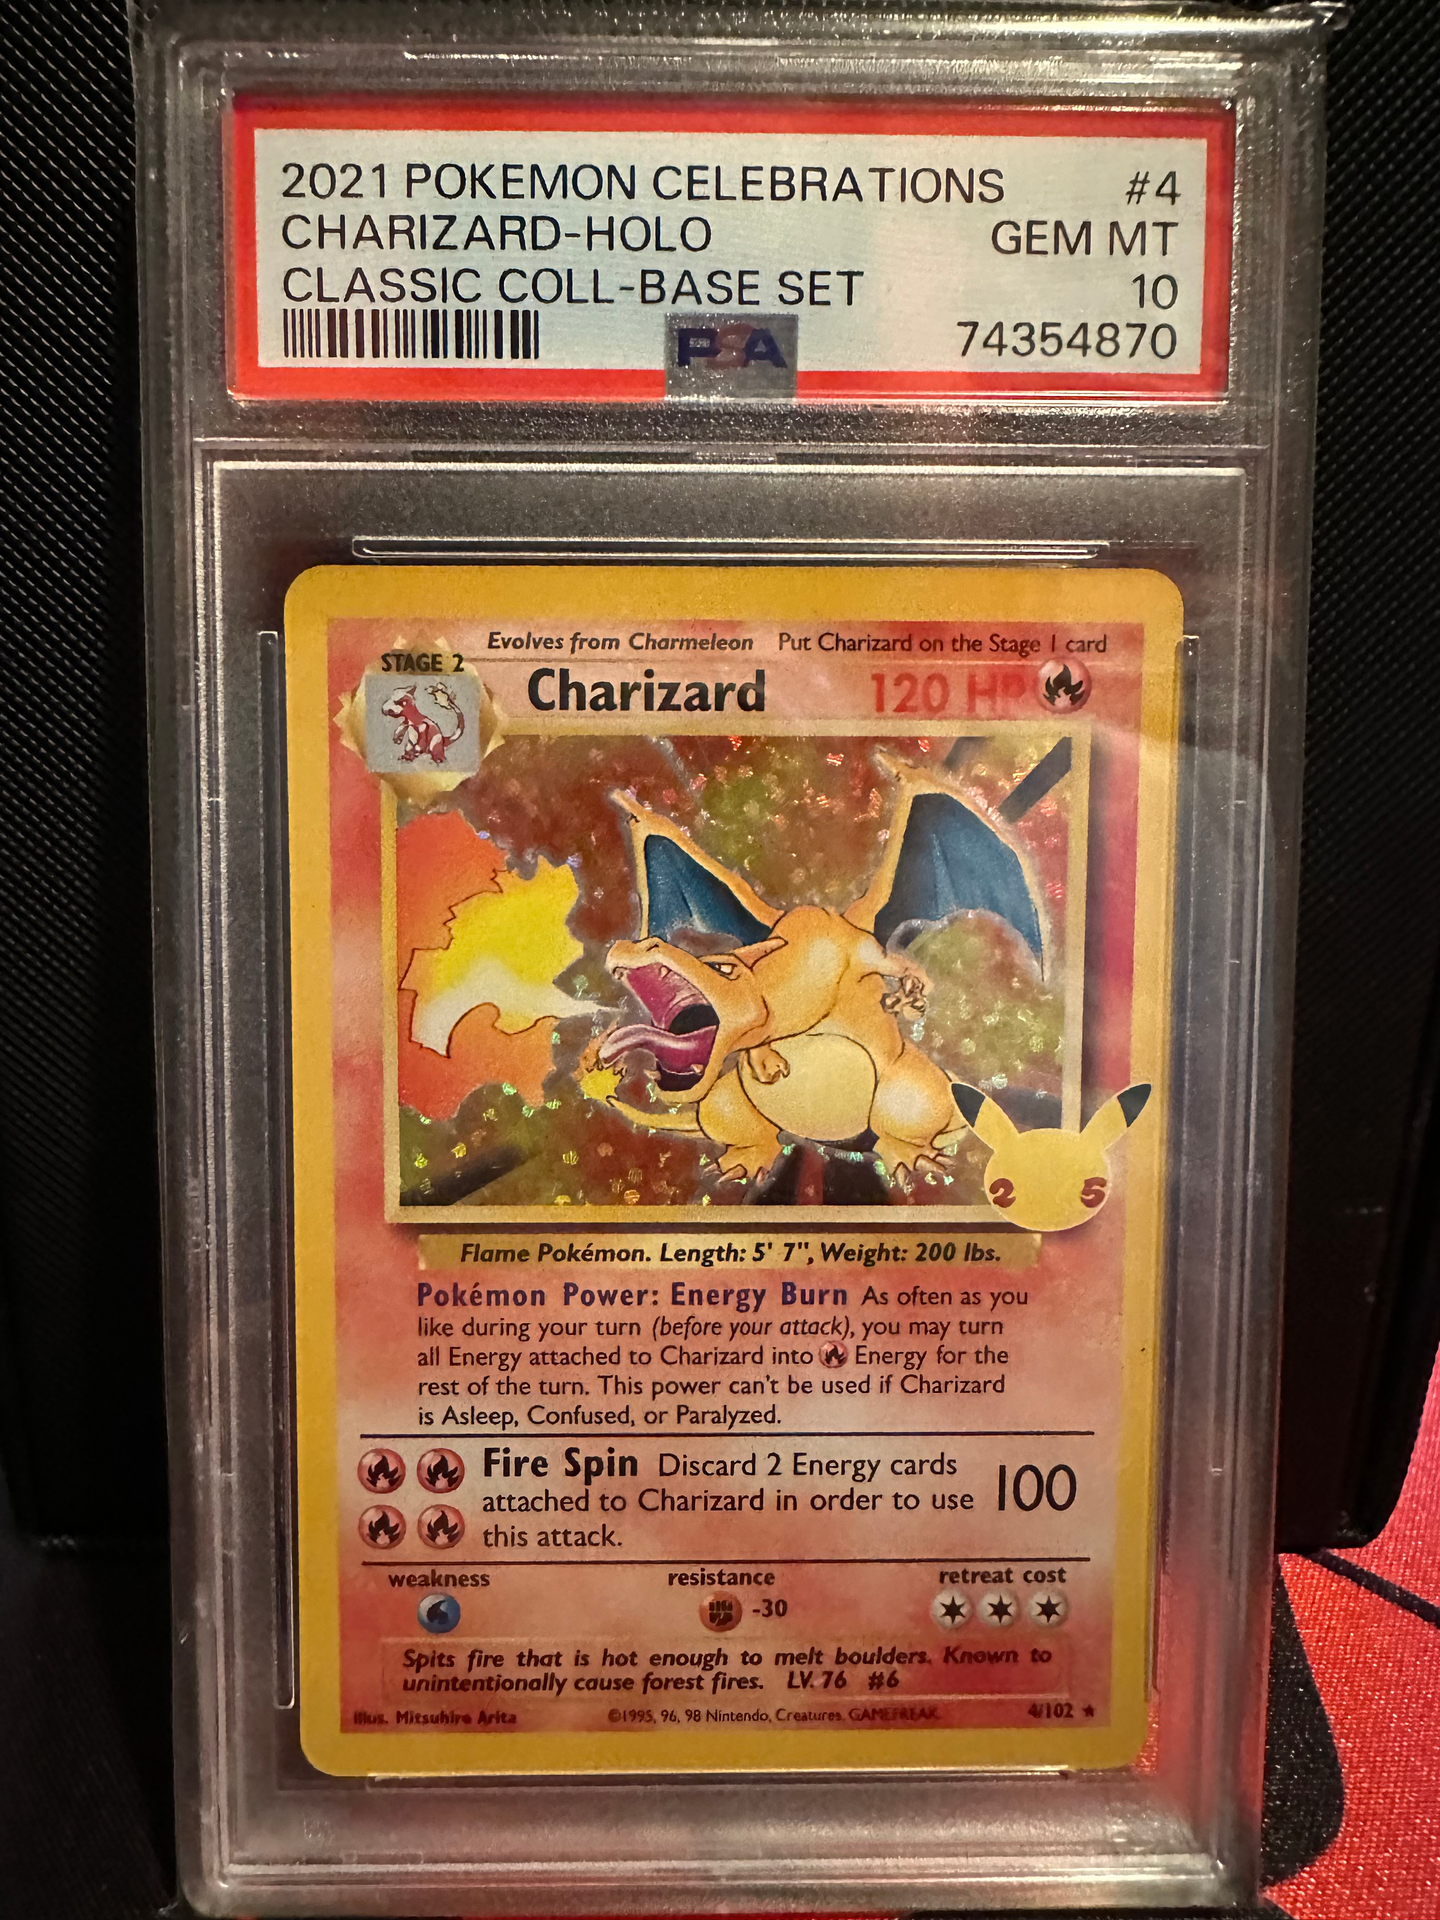 PSA 10 Charizard Classic Collection Holo (Graded Card)